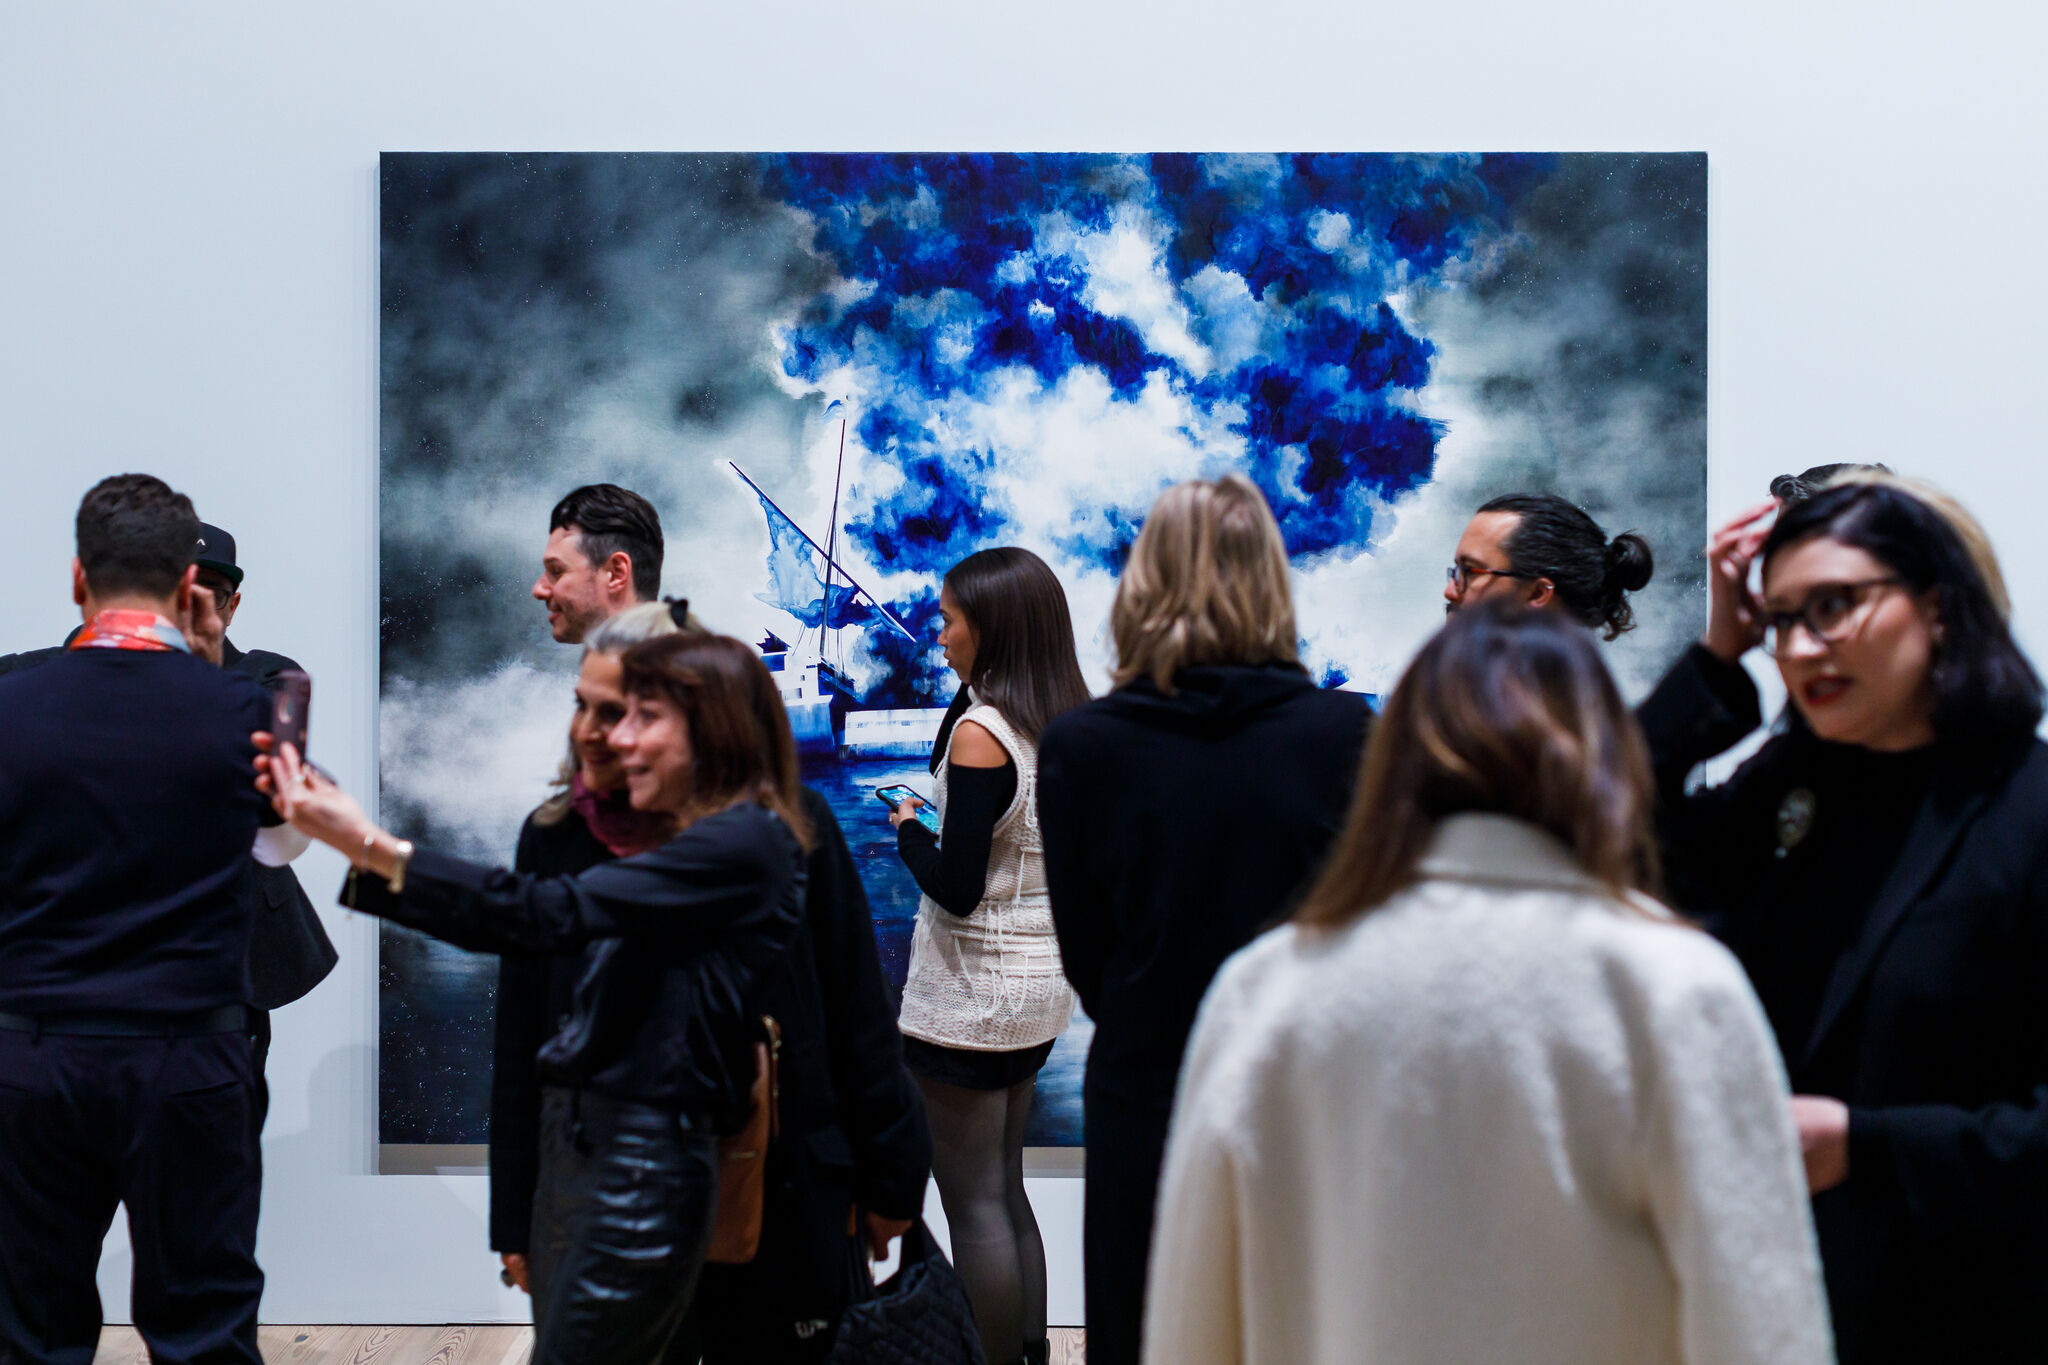 A group of people scattered in the gallery looking at artwork and talking with one another. In the background is a largescale artwork featuring a ship, sky and clouds